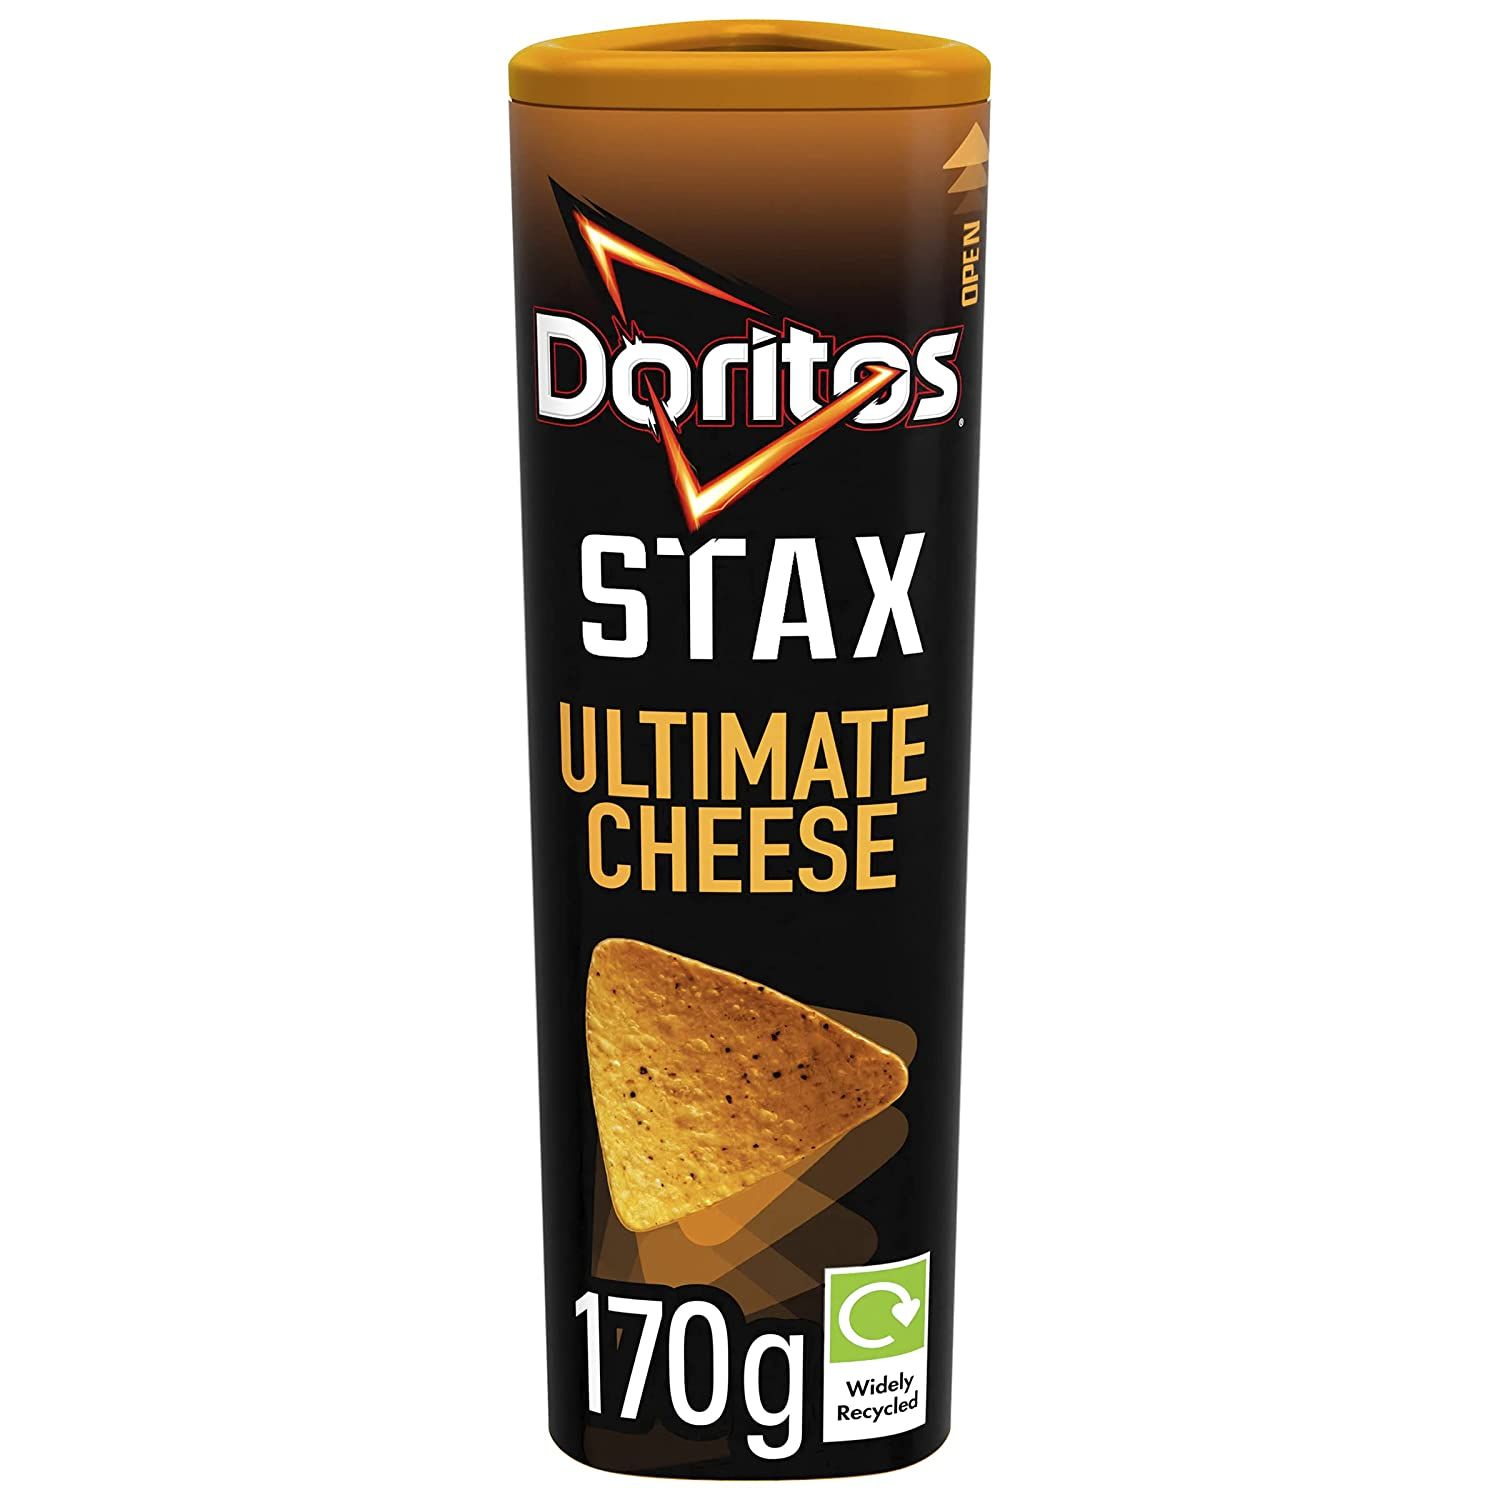 Doritos STAX Ultimate Cheese Chips Image